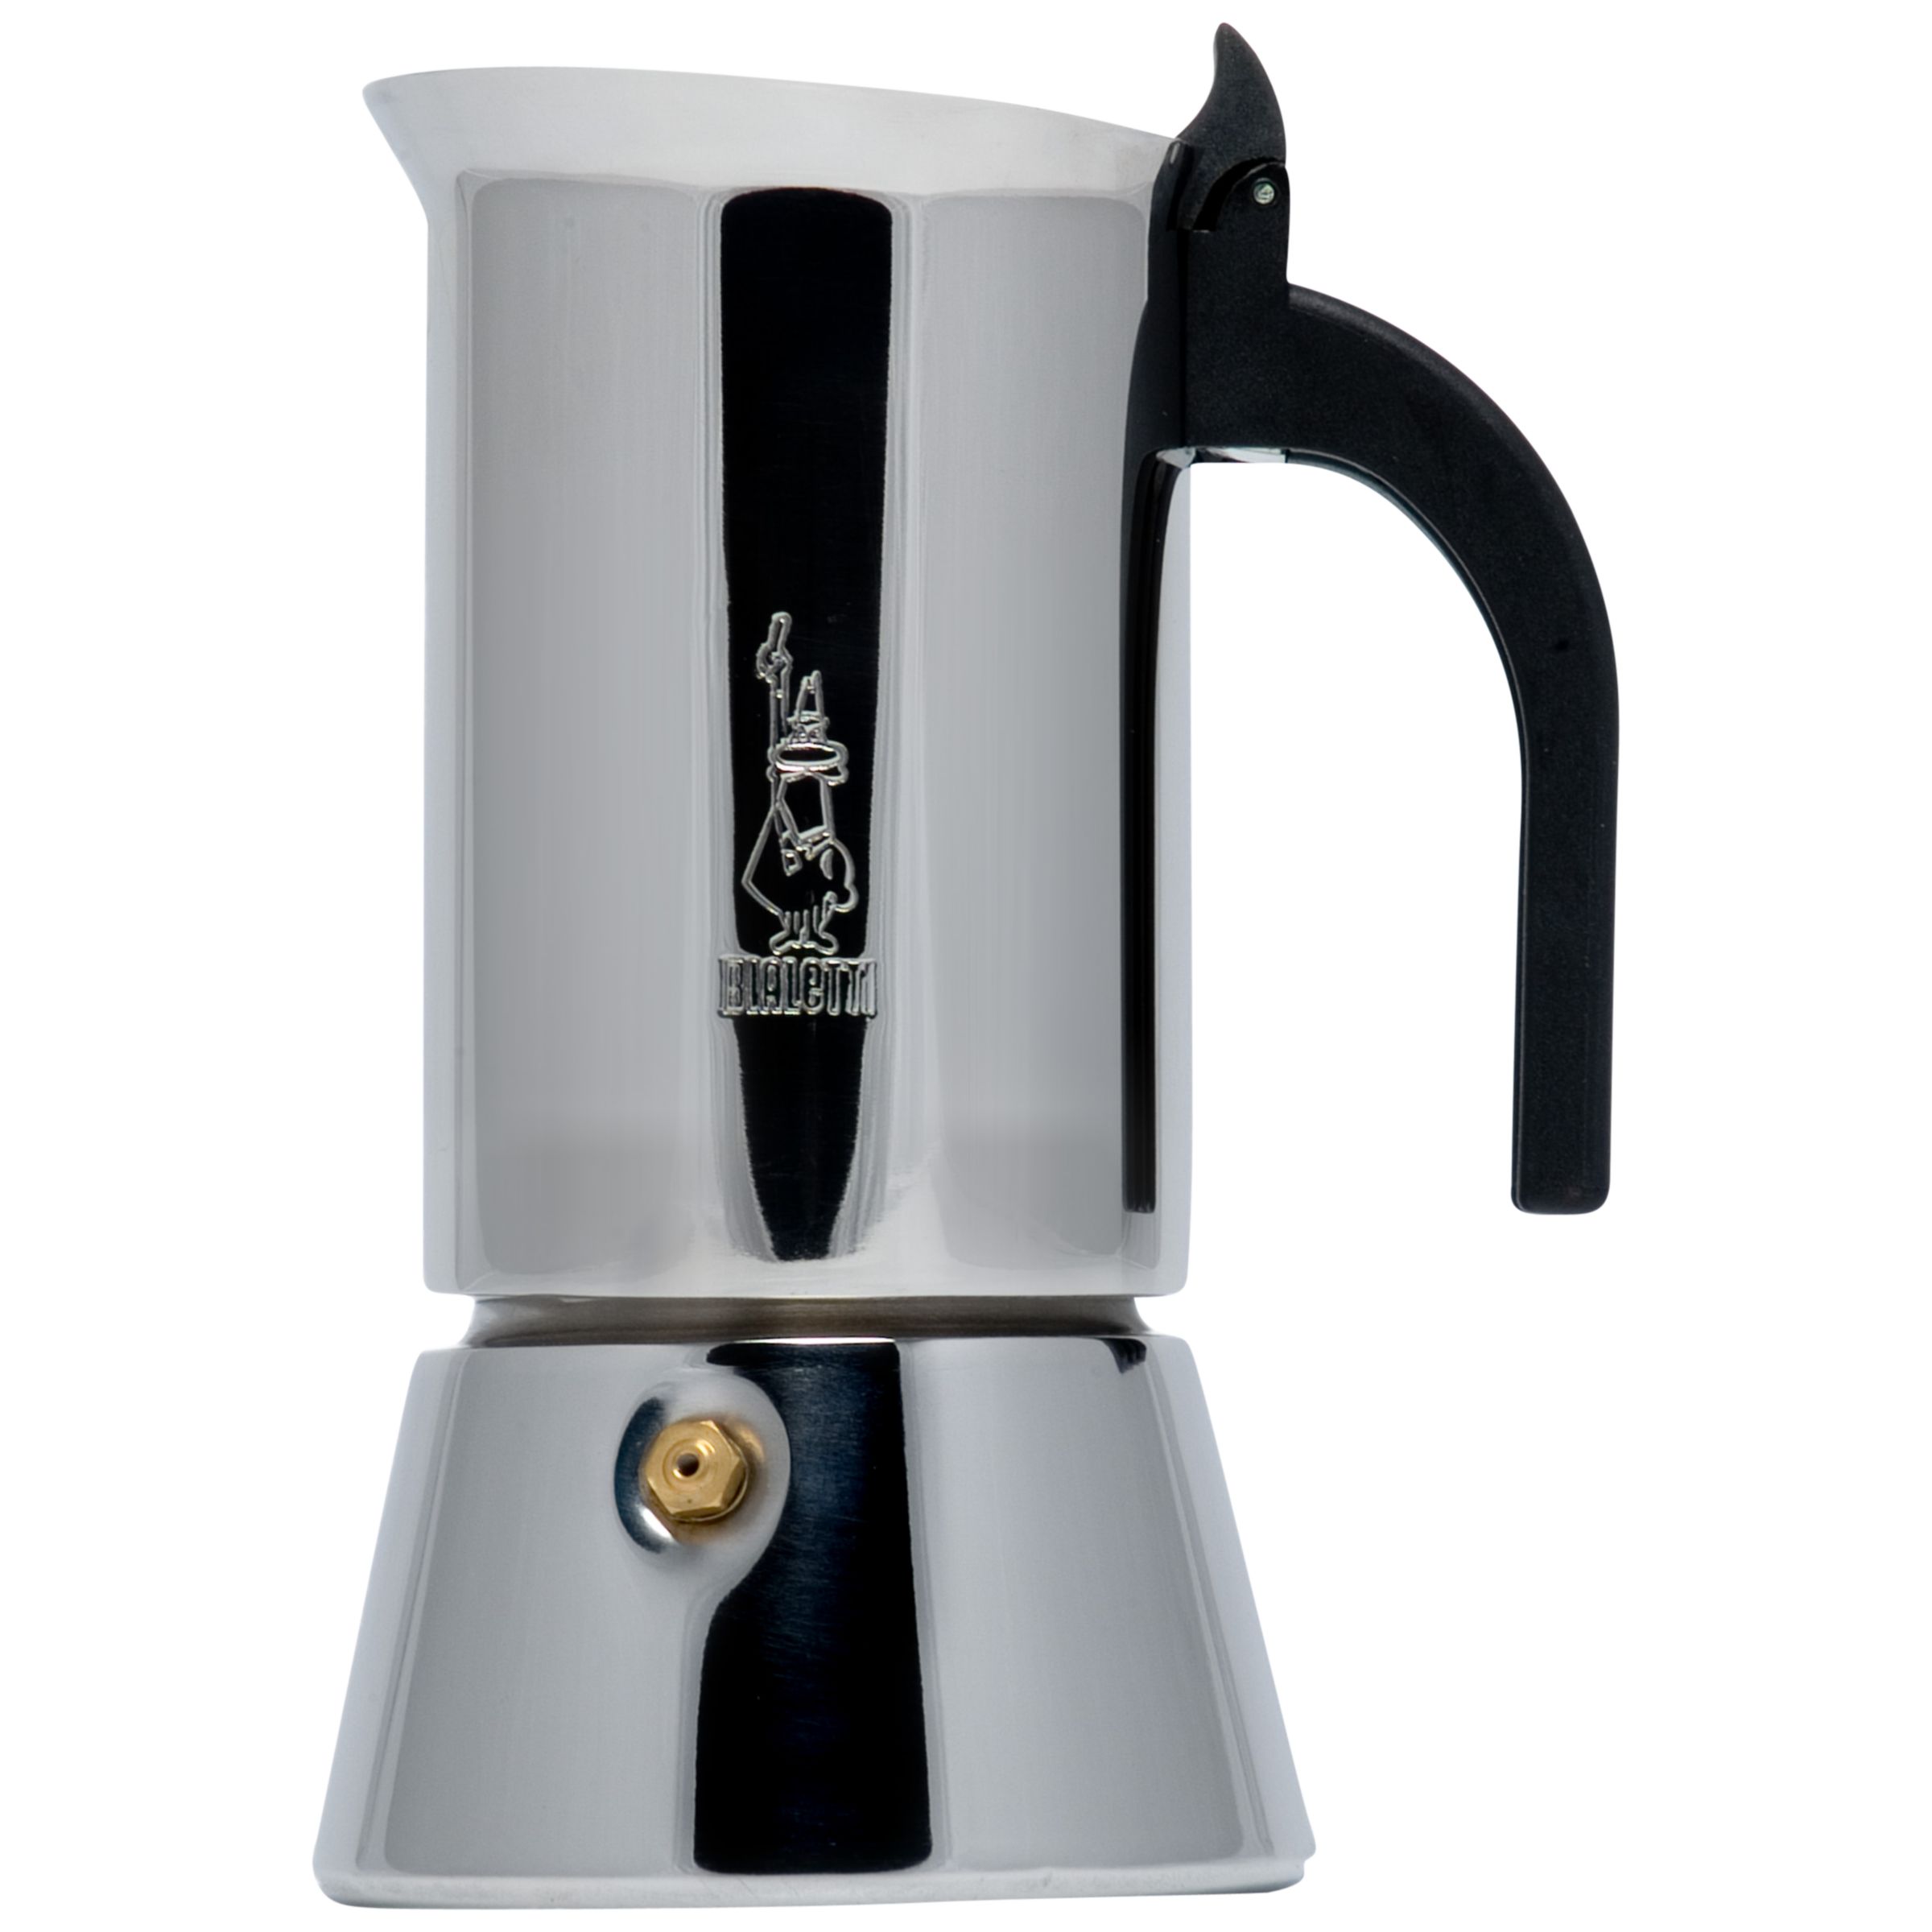 Bialetti Cup Venus Stainless Steel Stovetop Espresso Coffee Maker Induction Or Kitchen